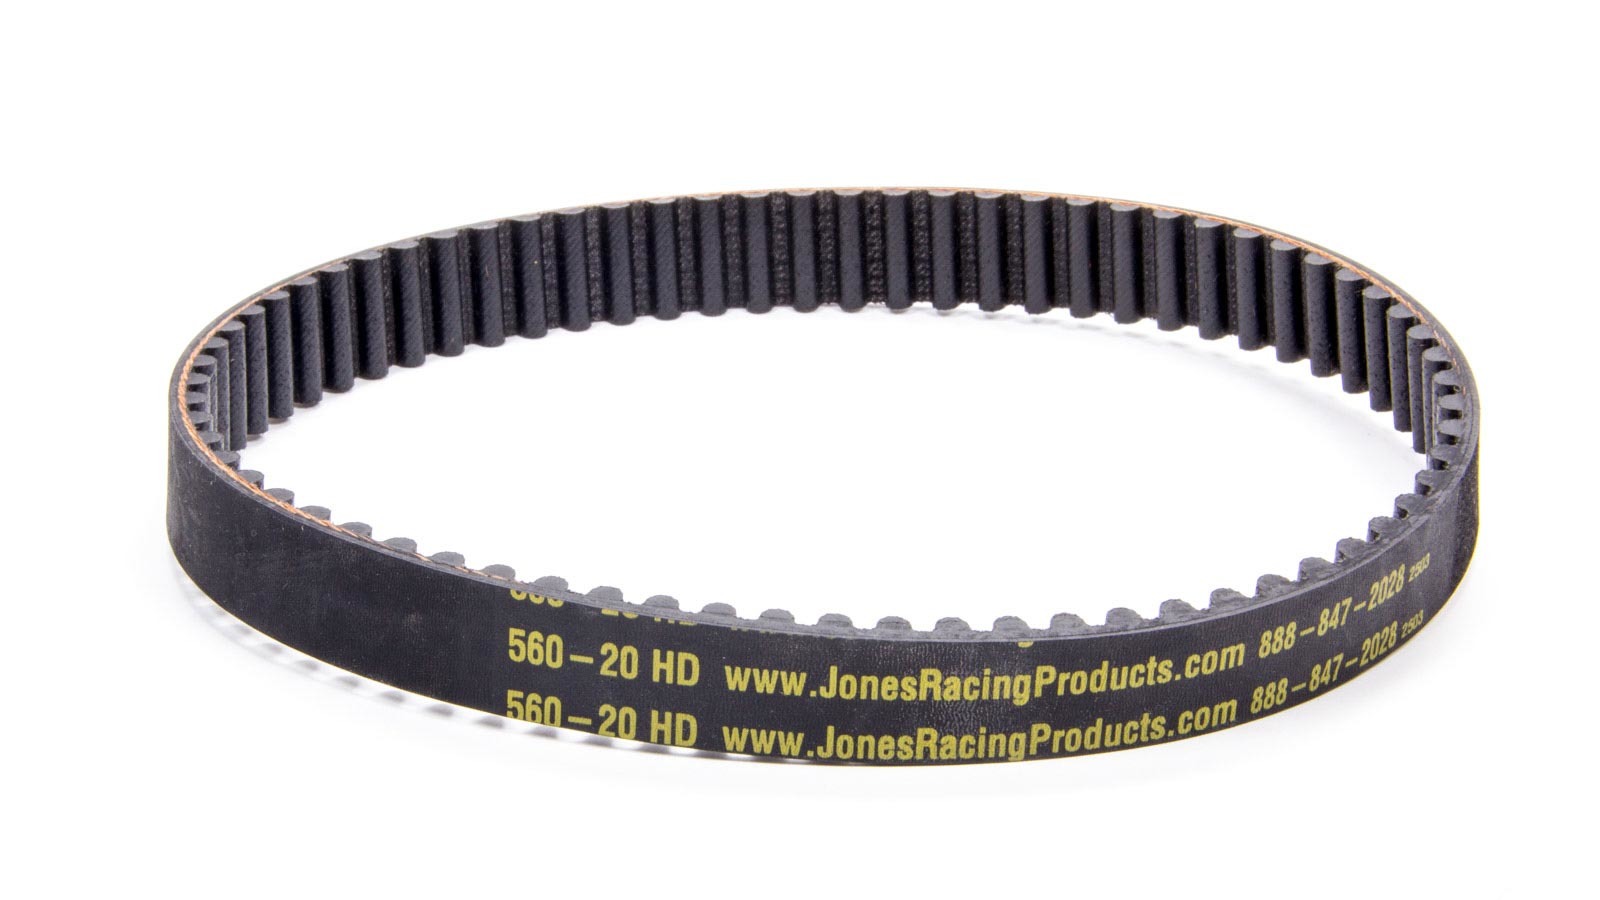 Jones Racing Products 600-20HD HTD Drive Belt, 23.620 in Long, 20 mm Wide, 8 mm Pitch, Each